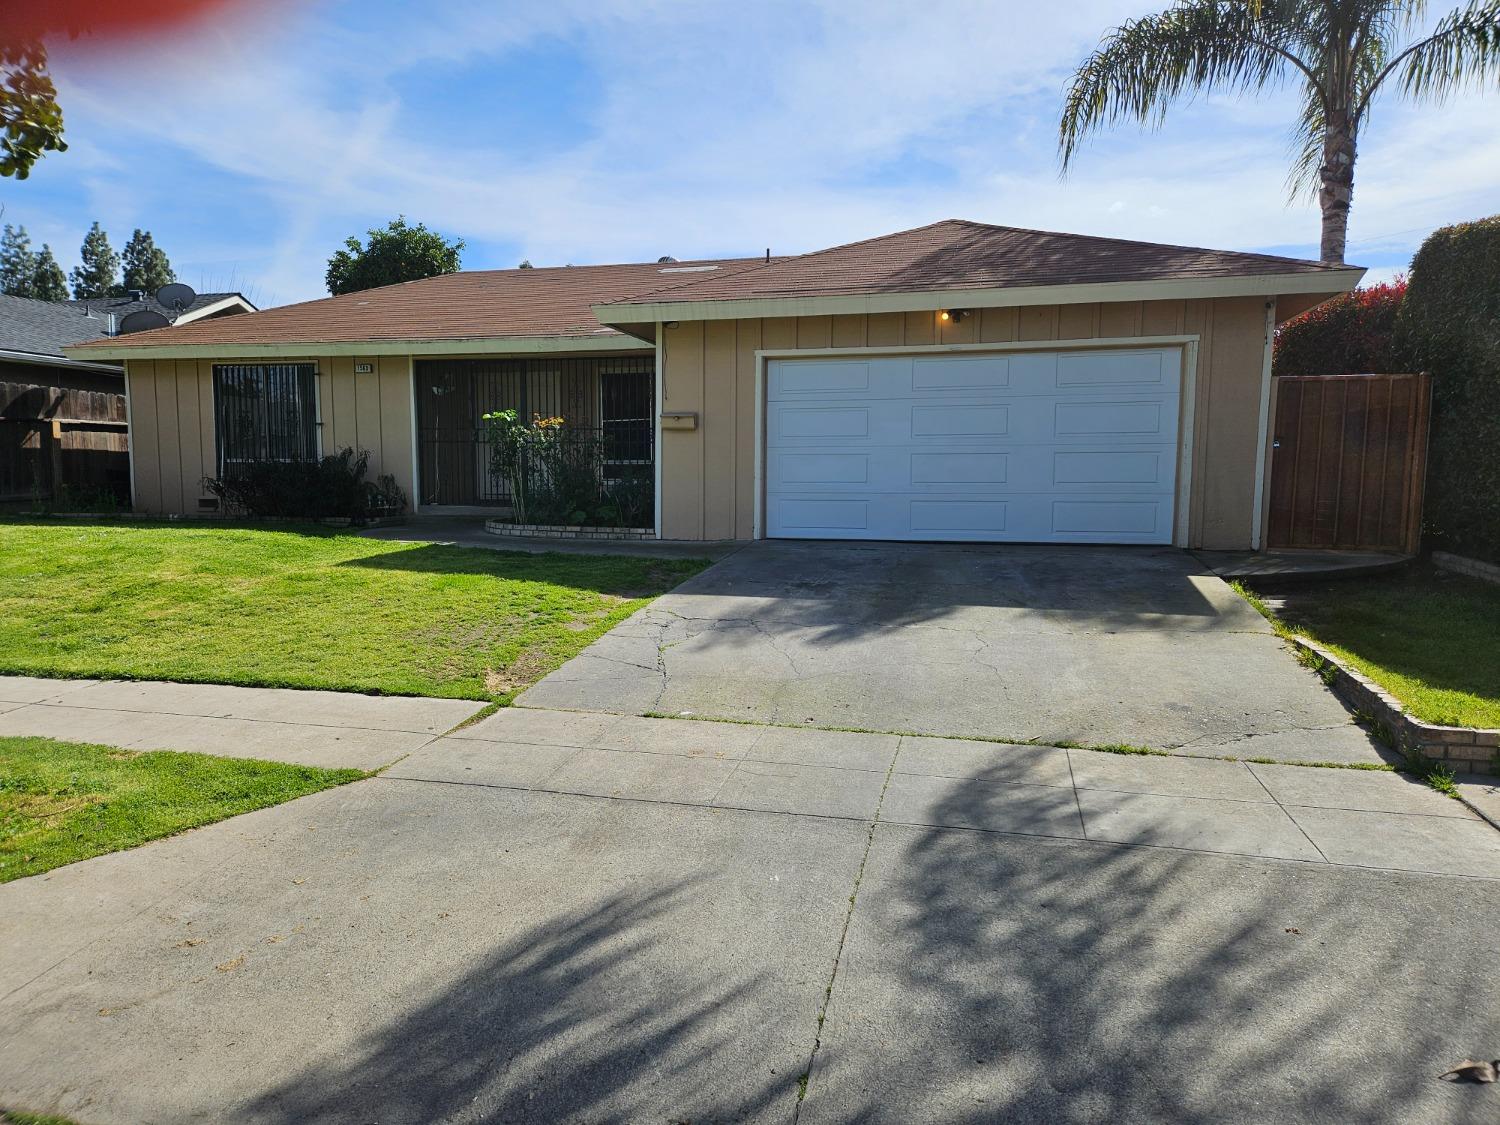 Photo of 1563 W Holland Ave in Fresno, CA